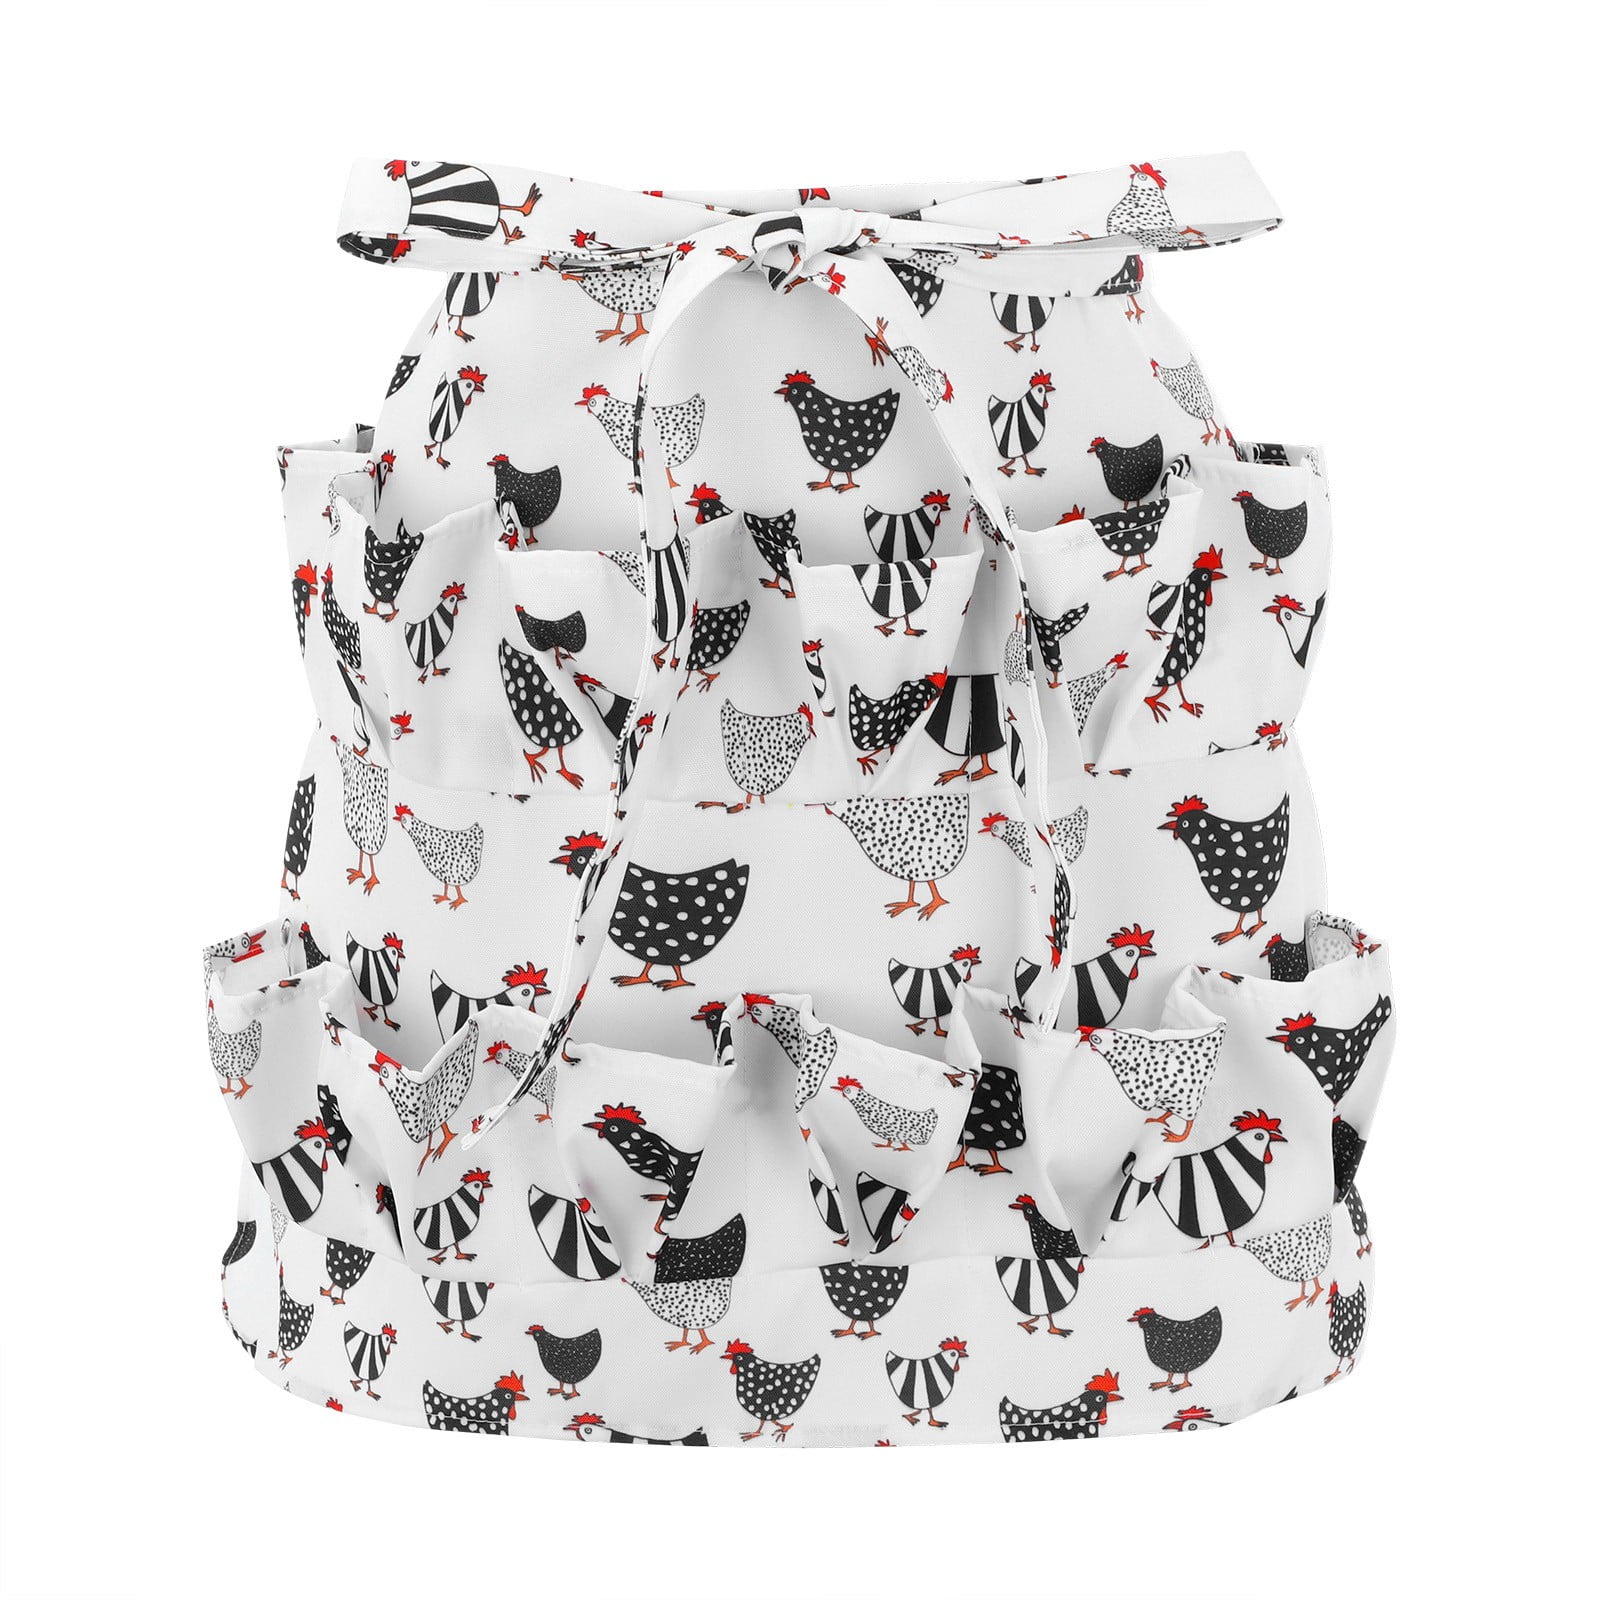 Chicken Eggs Apron With Pockets Apron For Fresh Eggs Collecting